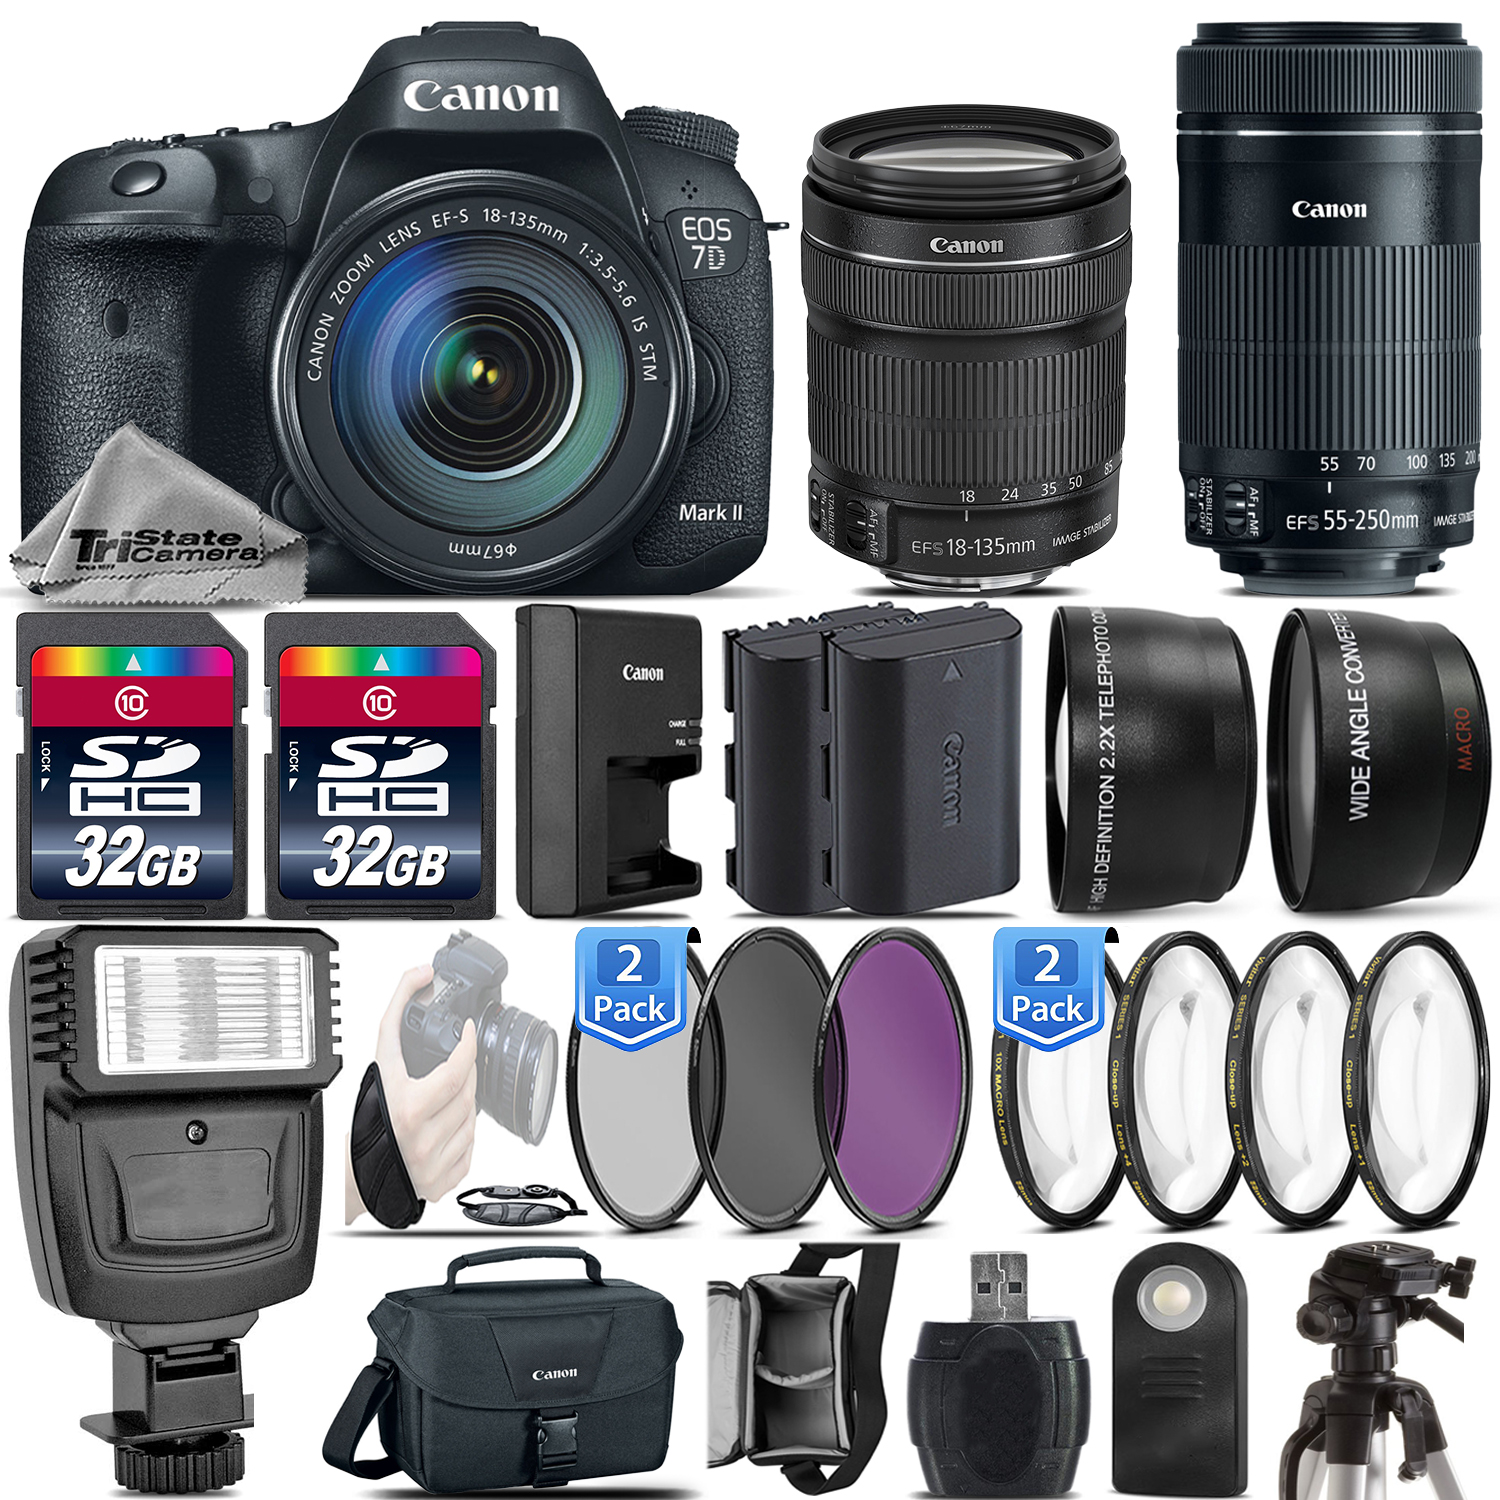 EOS 7D Mark II DSLR Camera + 18-135mm IS STM + 55-250mm IS STM - 64GB Kit *FREE SHIPPING*